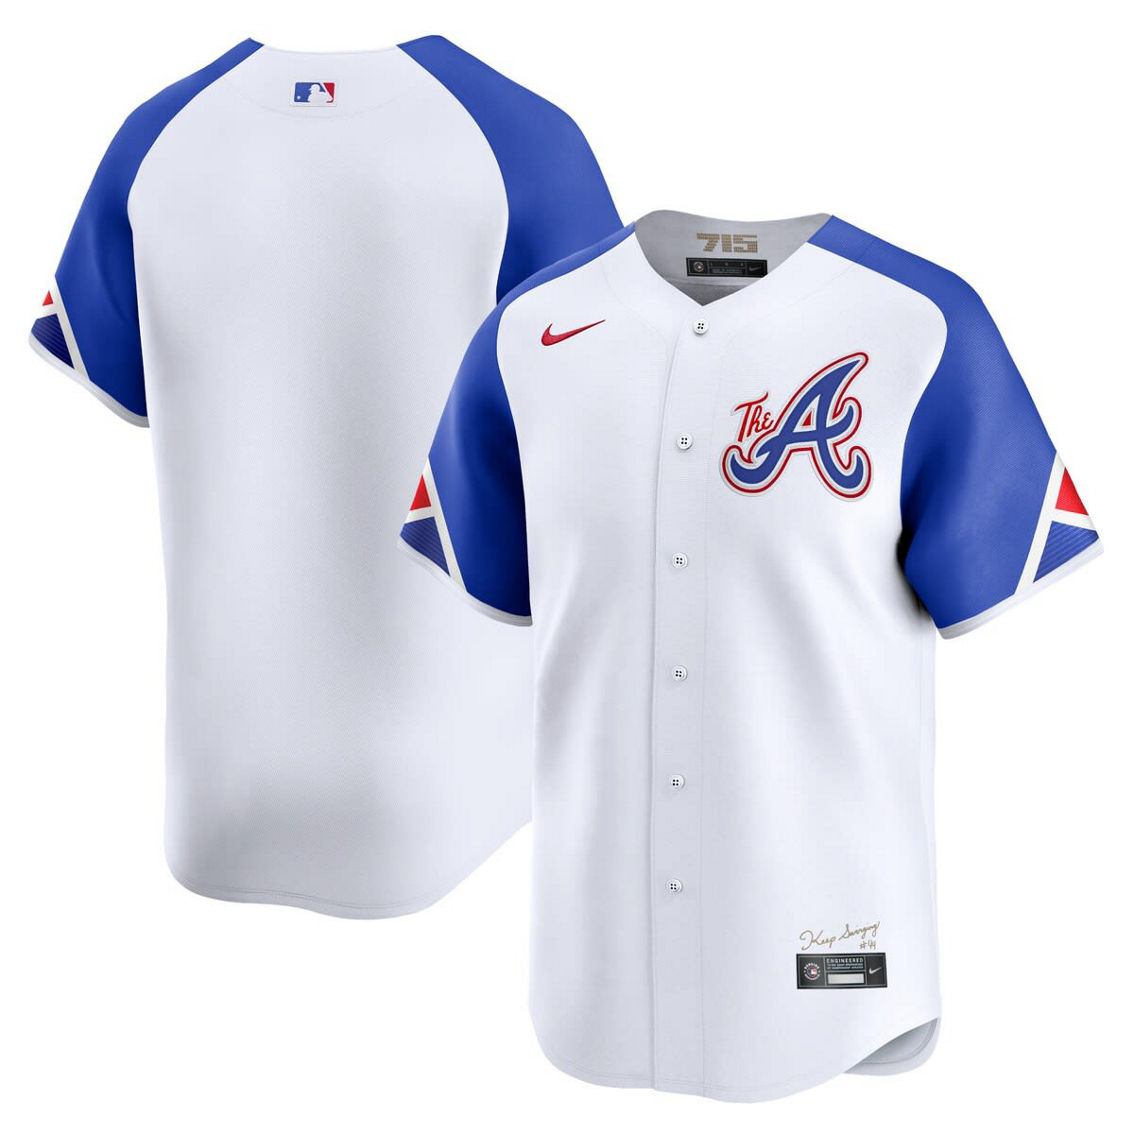 Nike Men's White Atlanta Braves City Connect Limited Jersey - Image 2 of 4